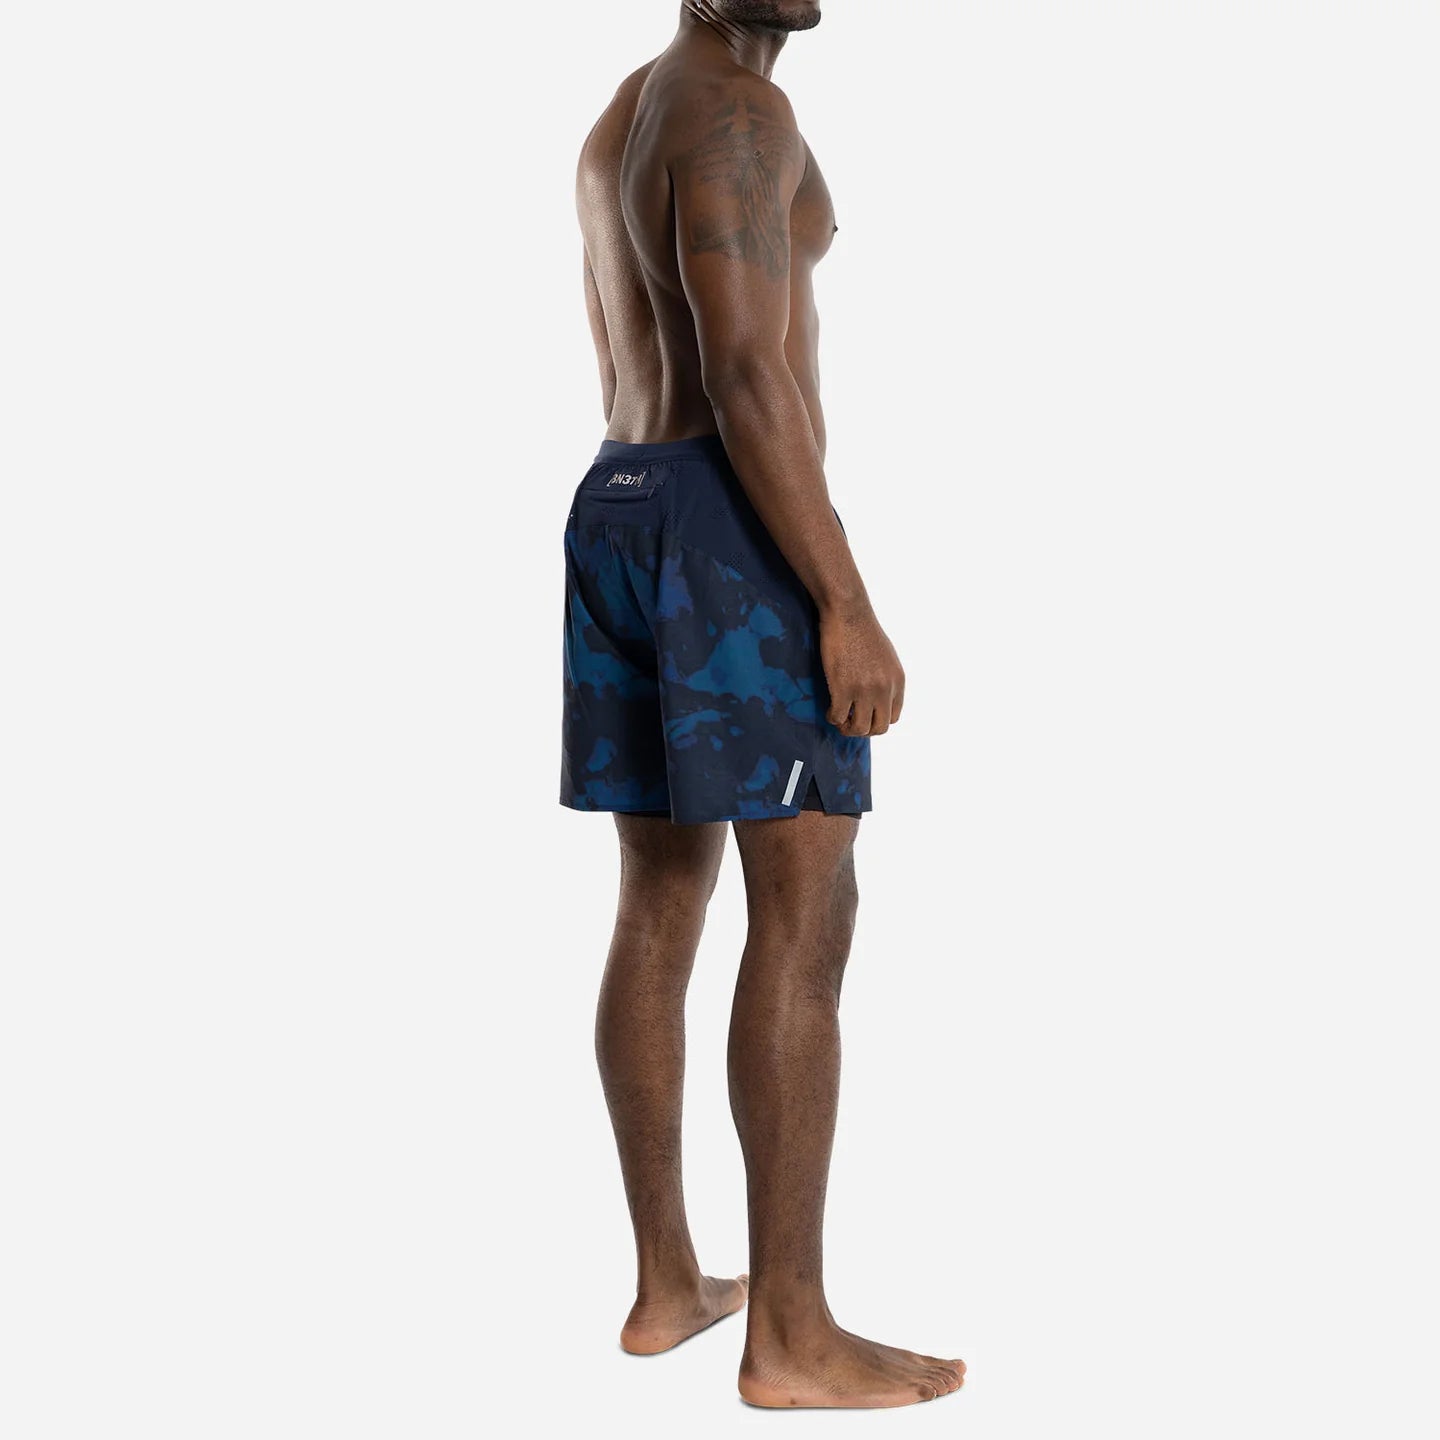 Bn3th - Runners High Short : Washed Out Navy